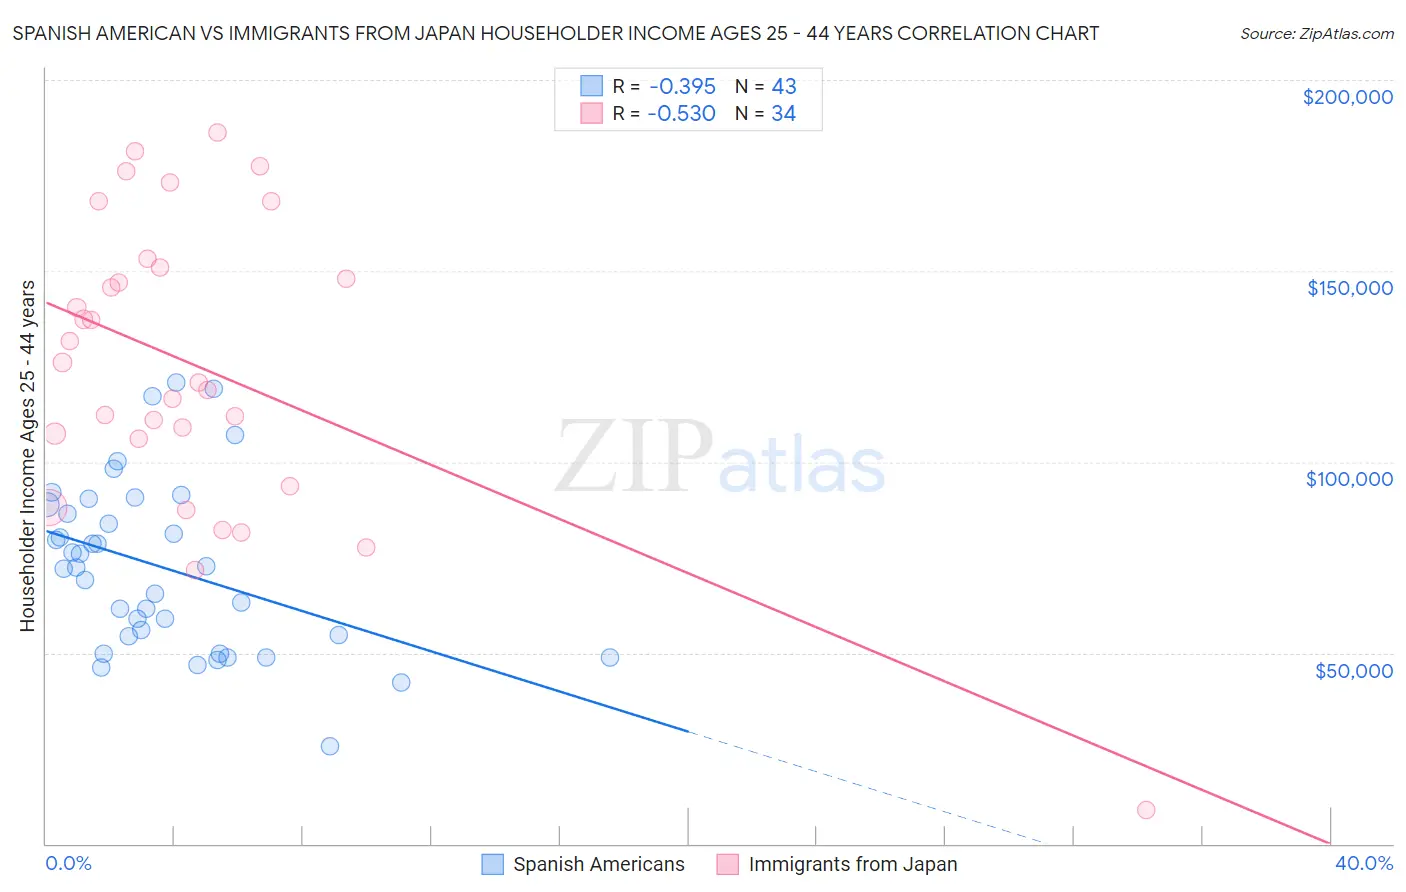 Spanish American vs Immigrants from Japan Householder Income Ages 25 - 44 years